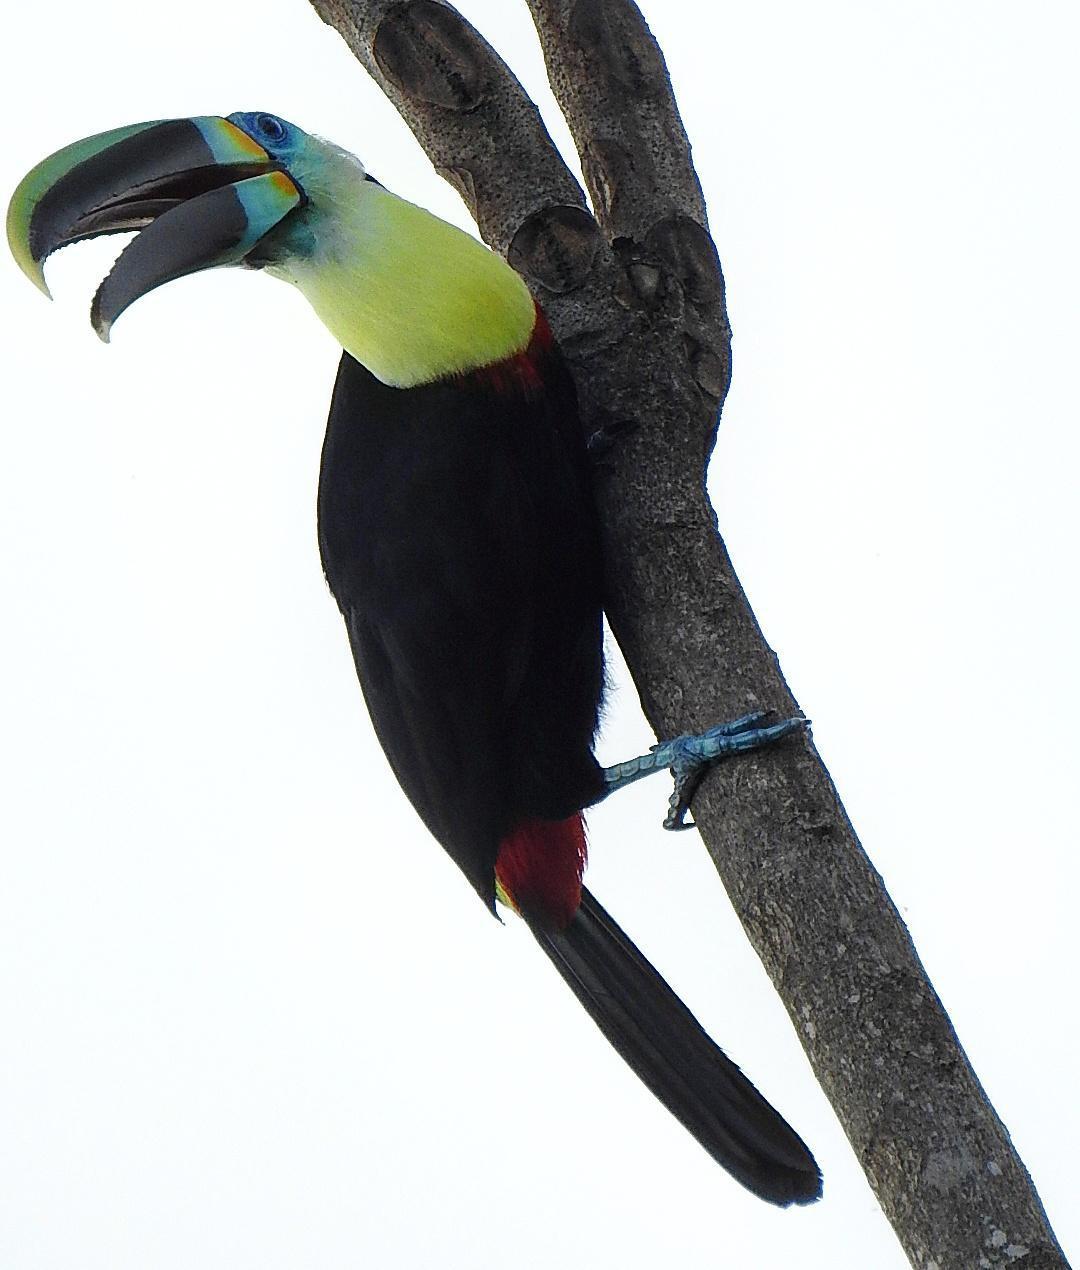 Channel-billed Toucan (Citron-throated) Photo by Julio Delgado